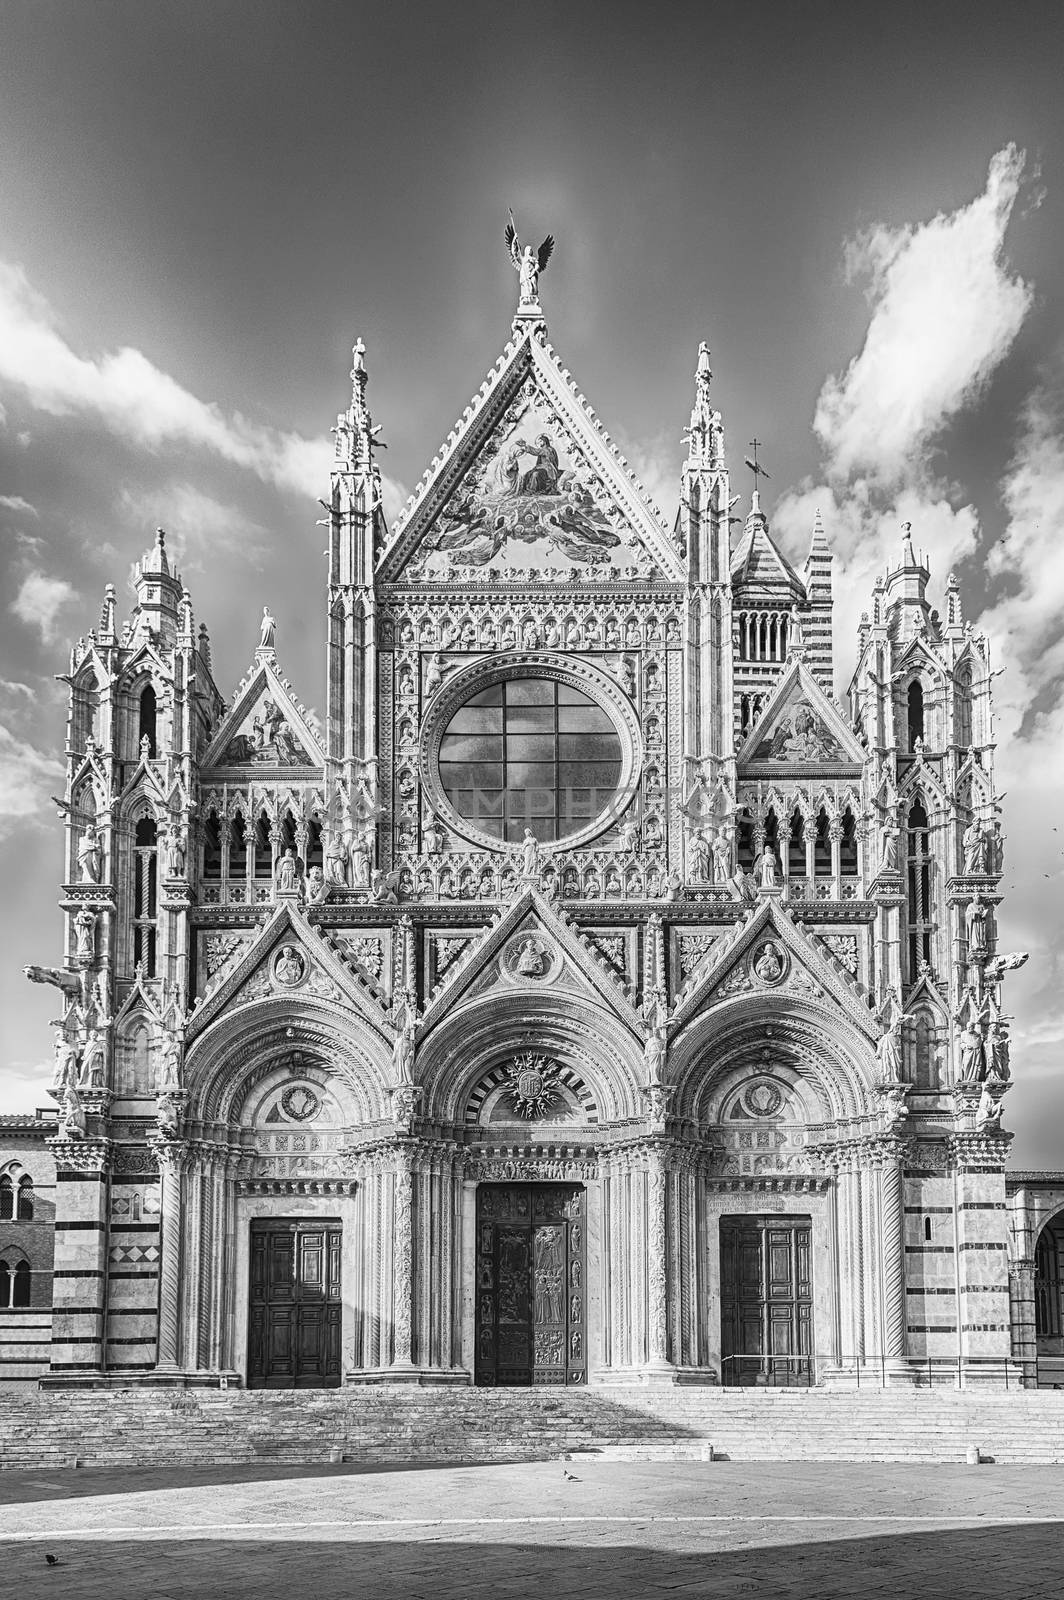 Facade of the gothic Cathedral of Siena, Tuscany, Italy by marcorubino